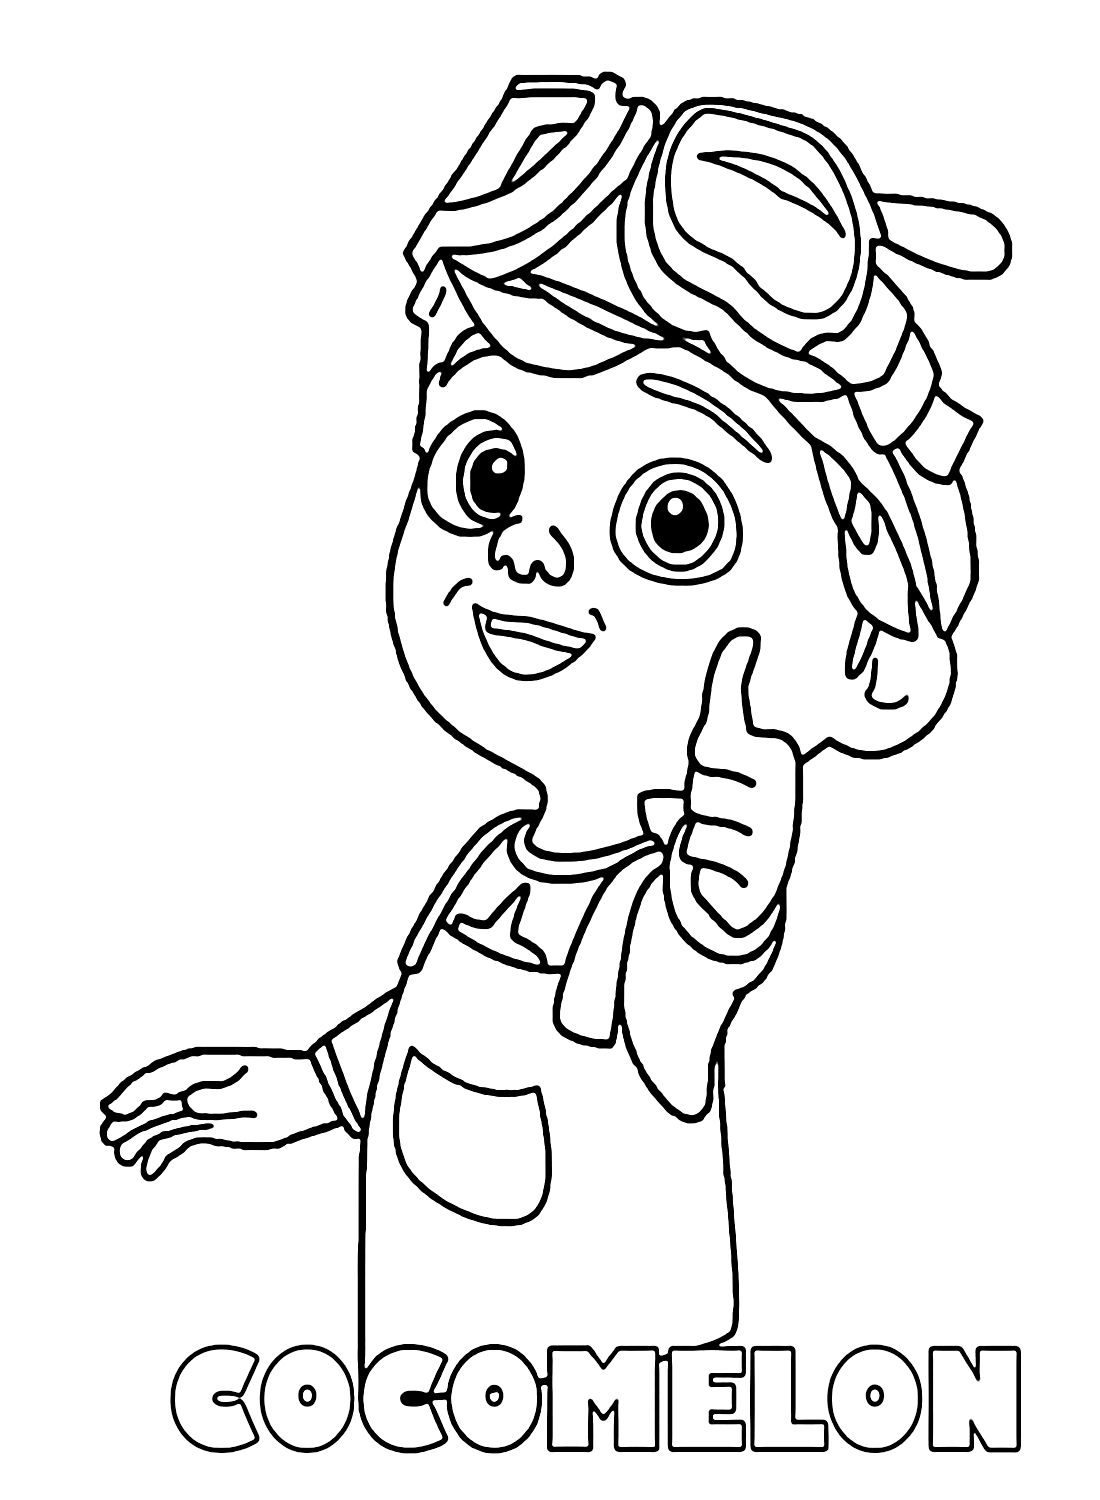 Tom Tom Cocomelon Coloring Pages from Cocomelon